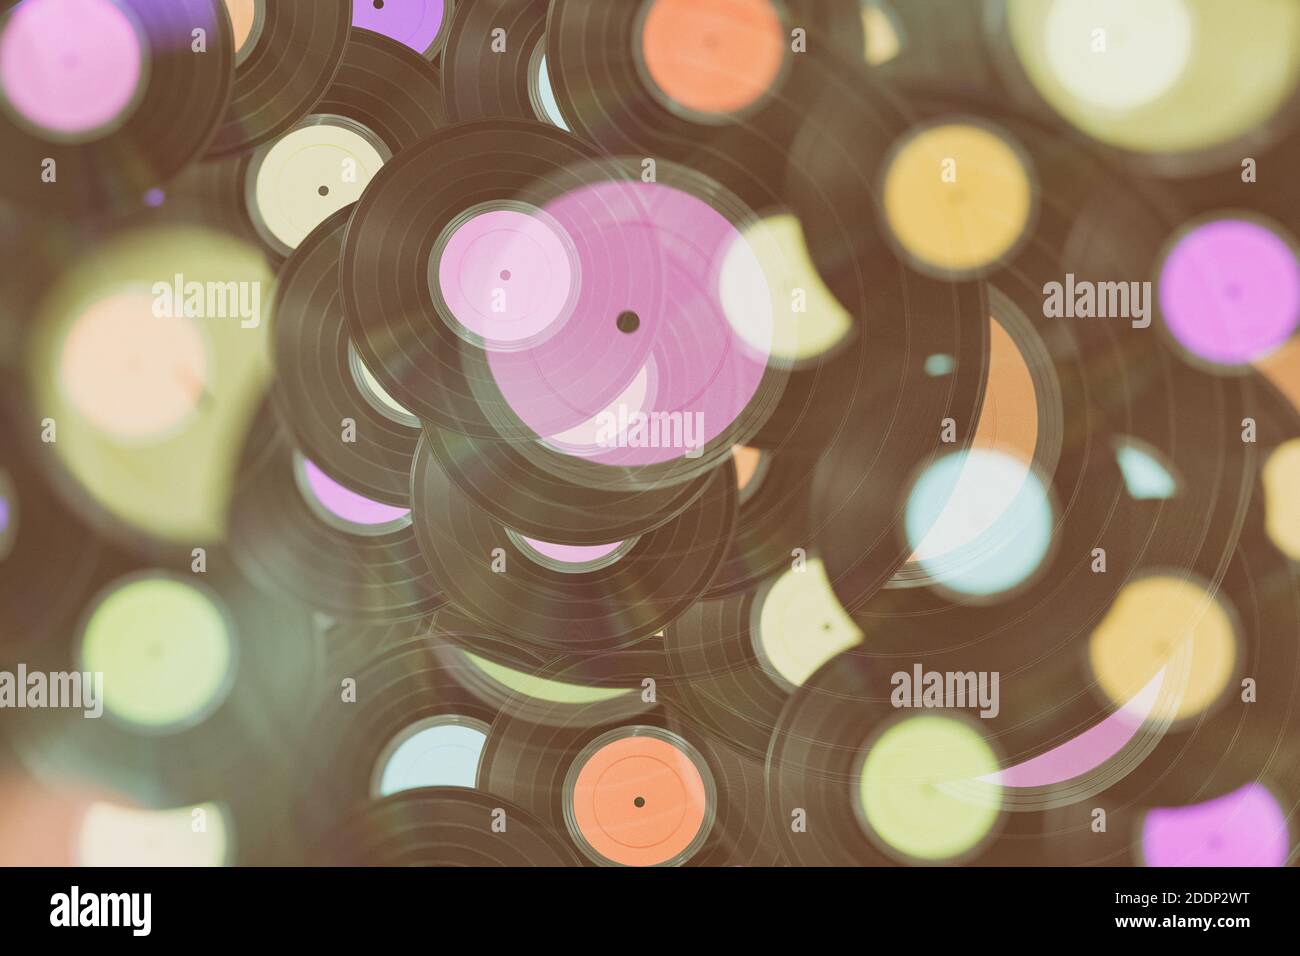 Background with several old vinyl records to play music Stock Photo